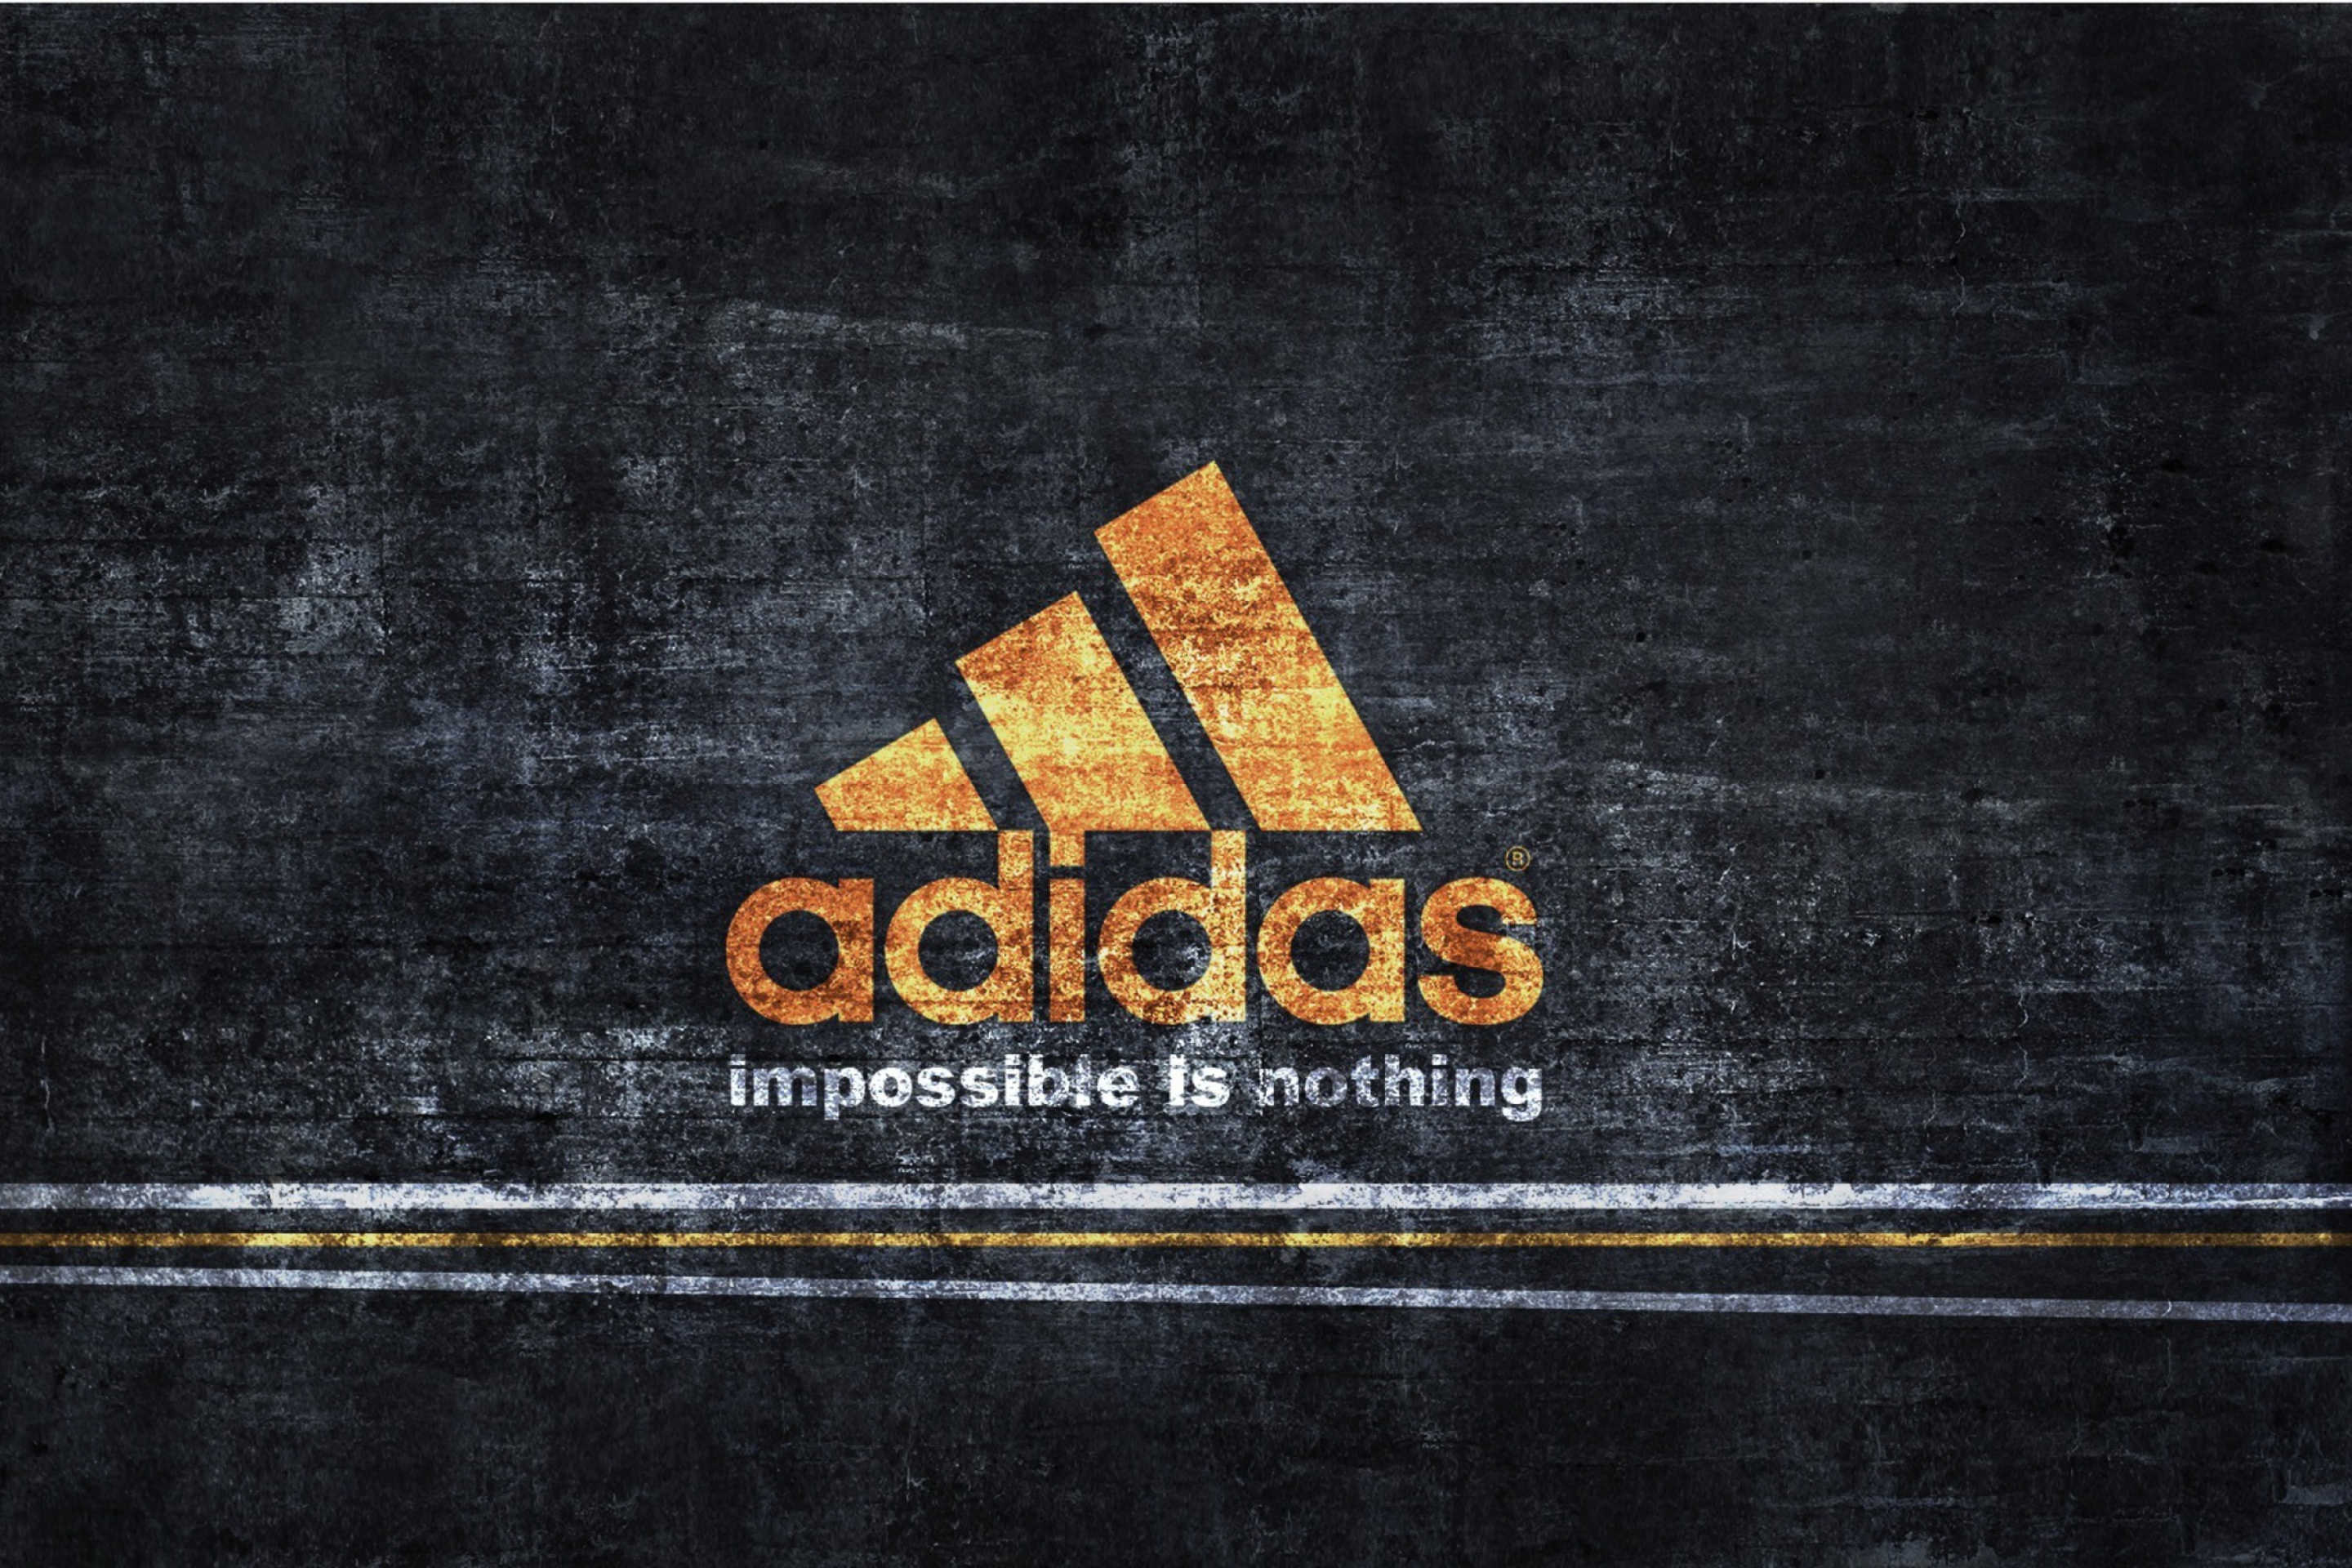 Обои Adidas – Impossible is Nothing 2880x1920